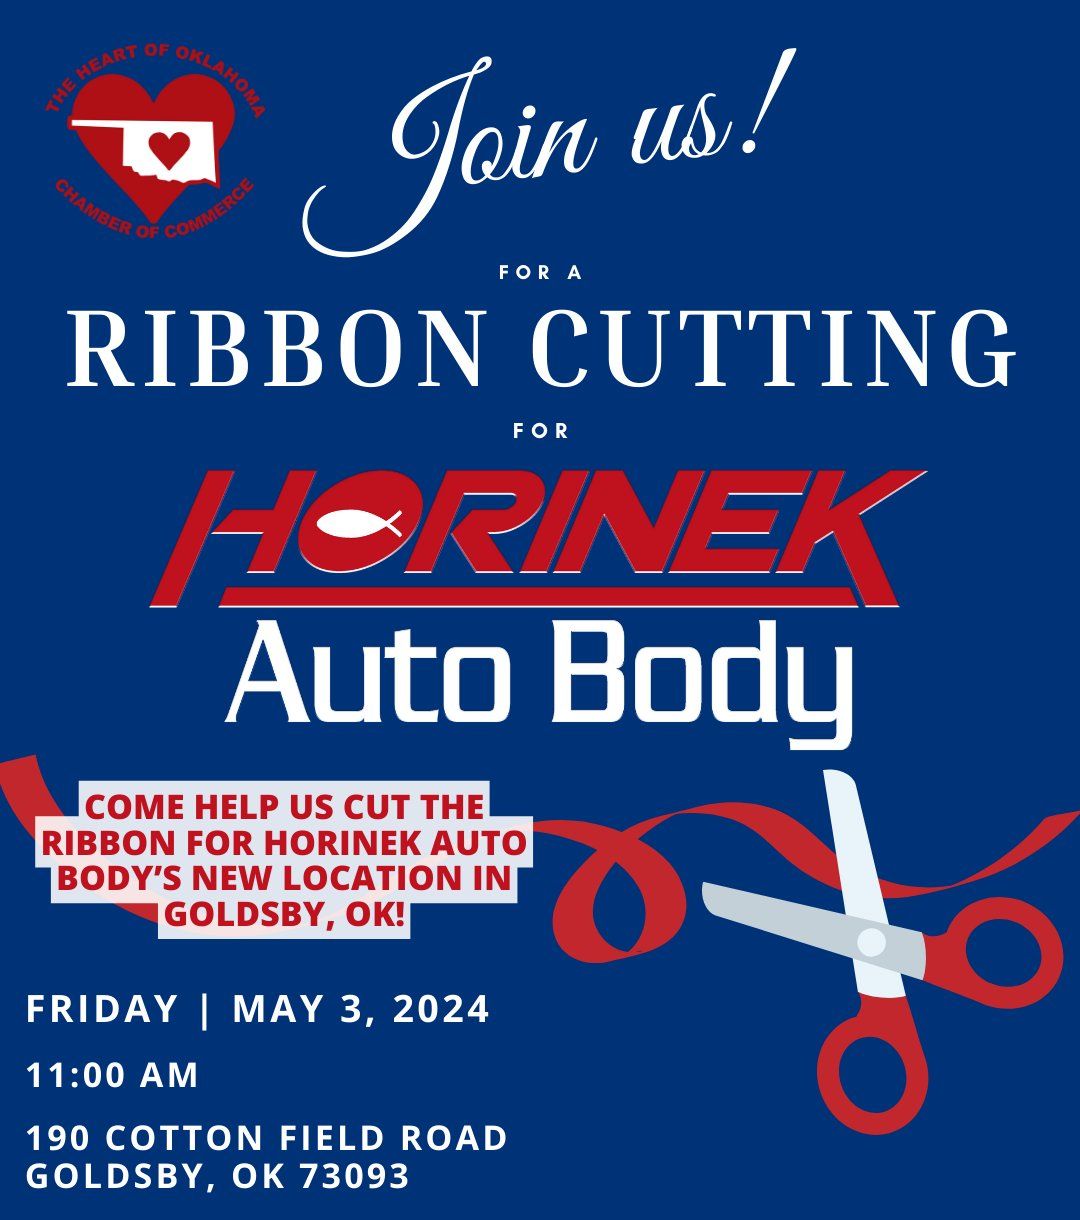 Chamber Ribbon Cutting for Horinek Auto Body's New Location in Goldsby